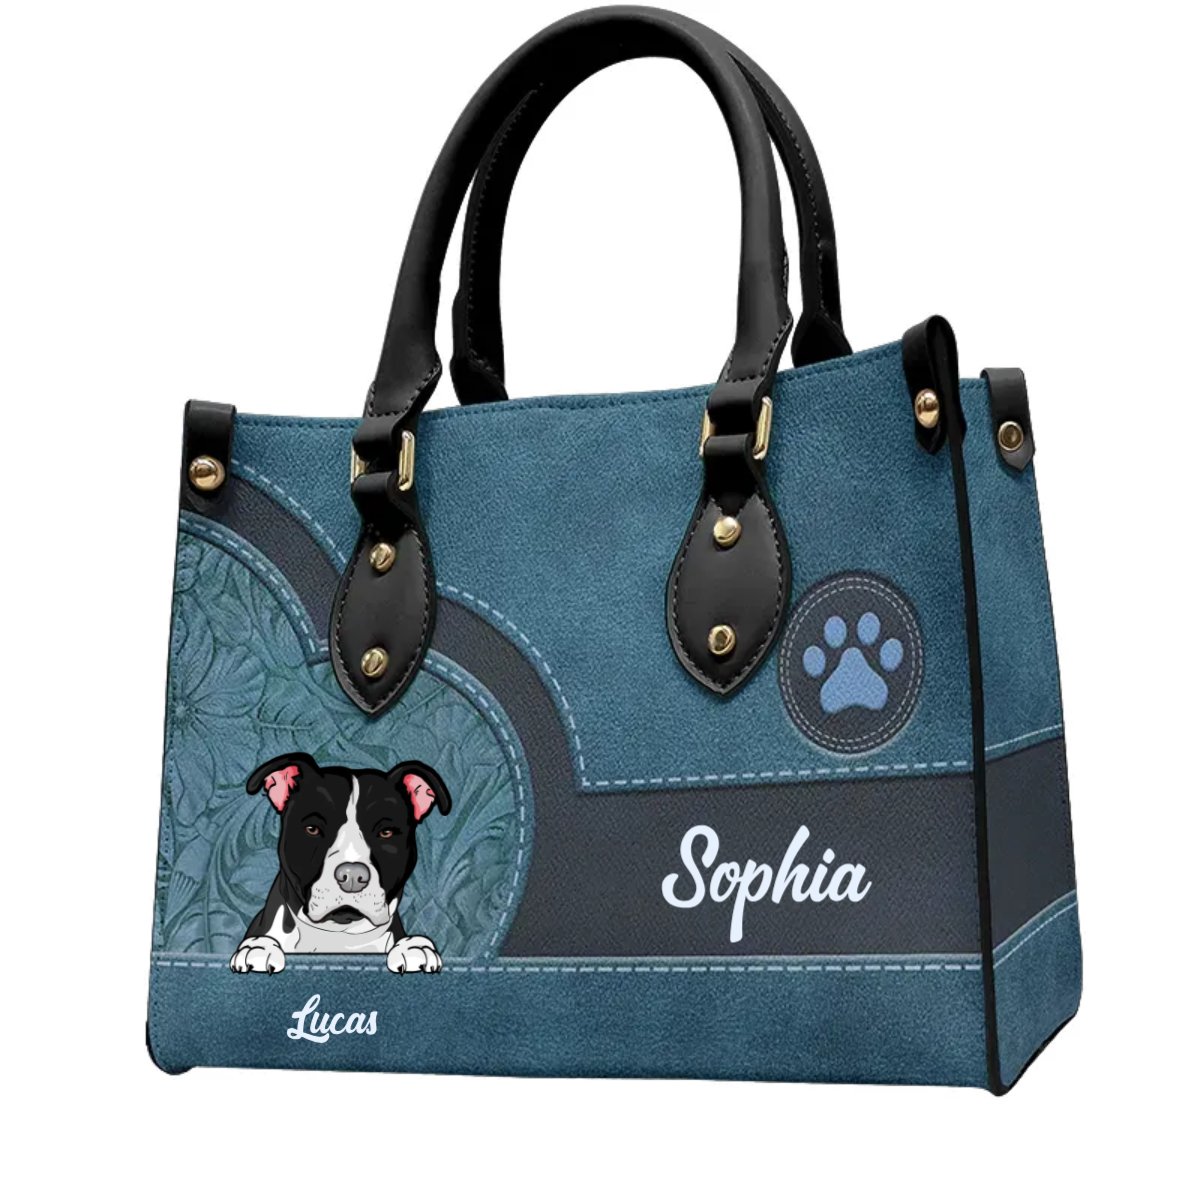 Pet lovers - Life Is Better With Fur Baby - Personalized Leather Bag - The Next Custom Gift